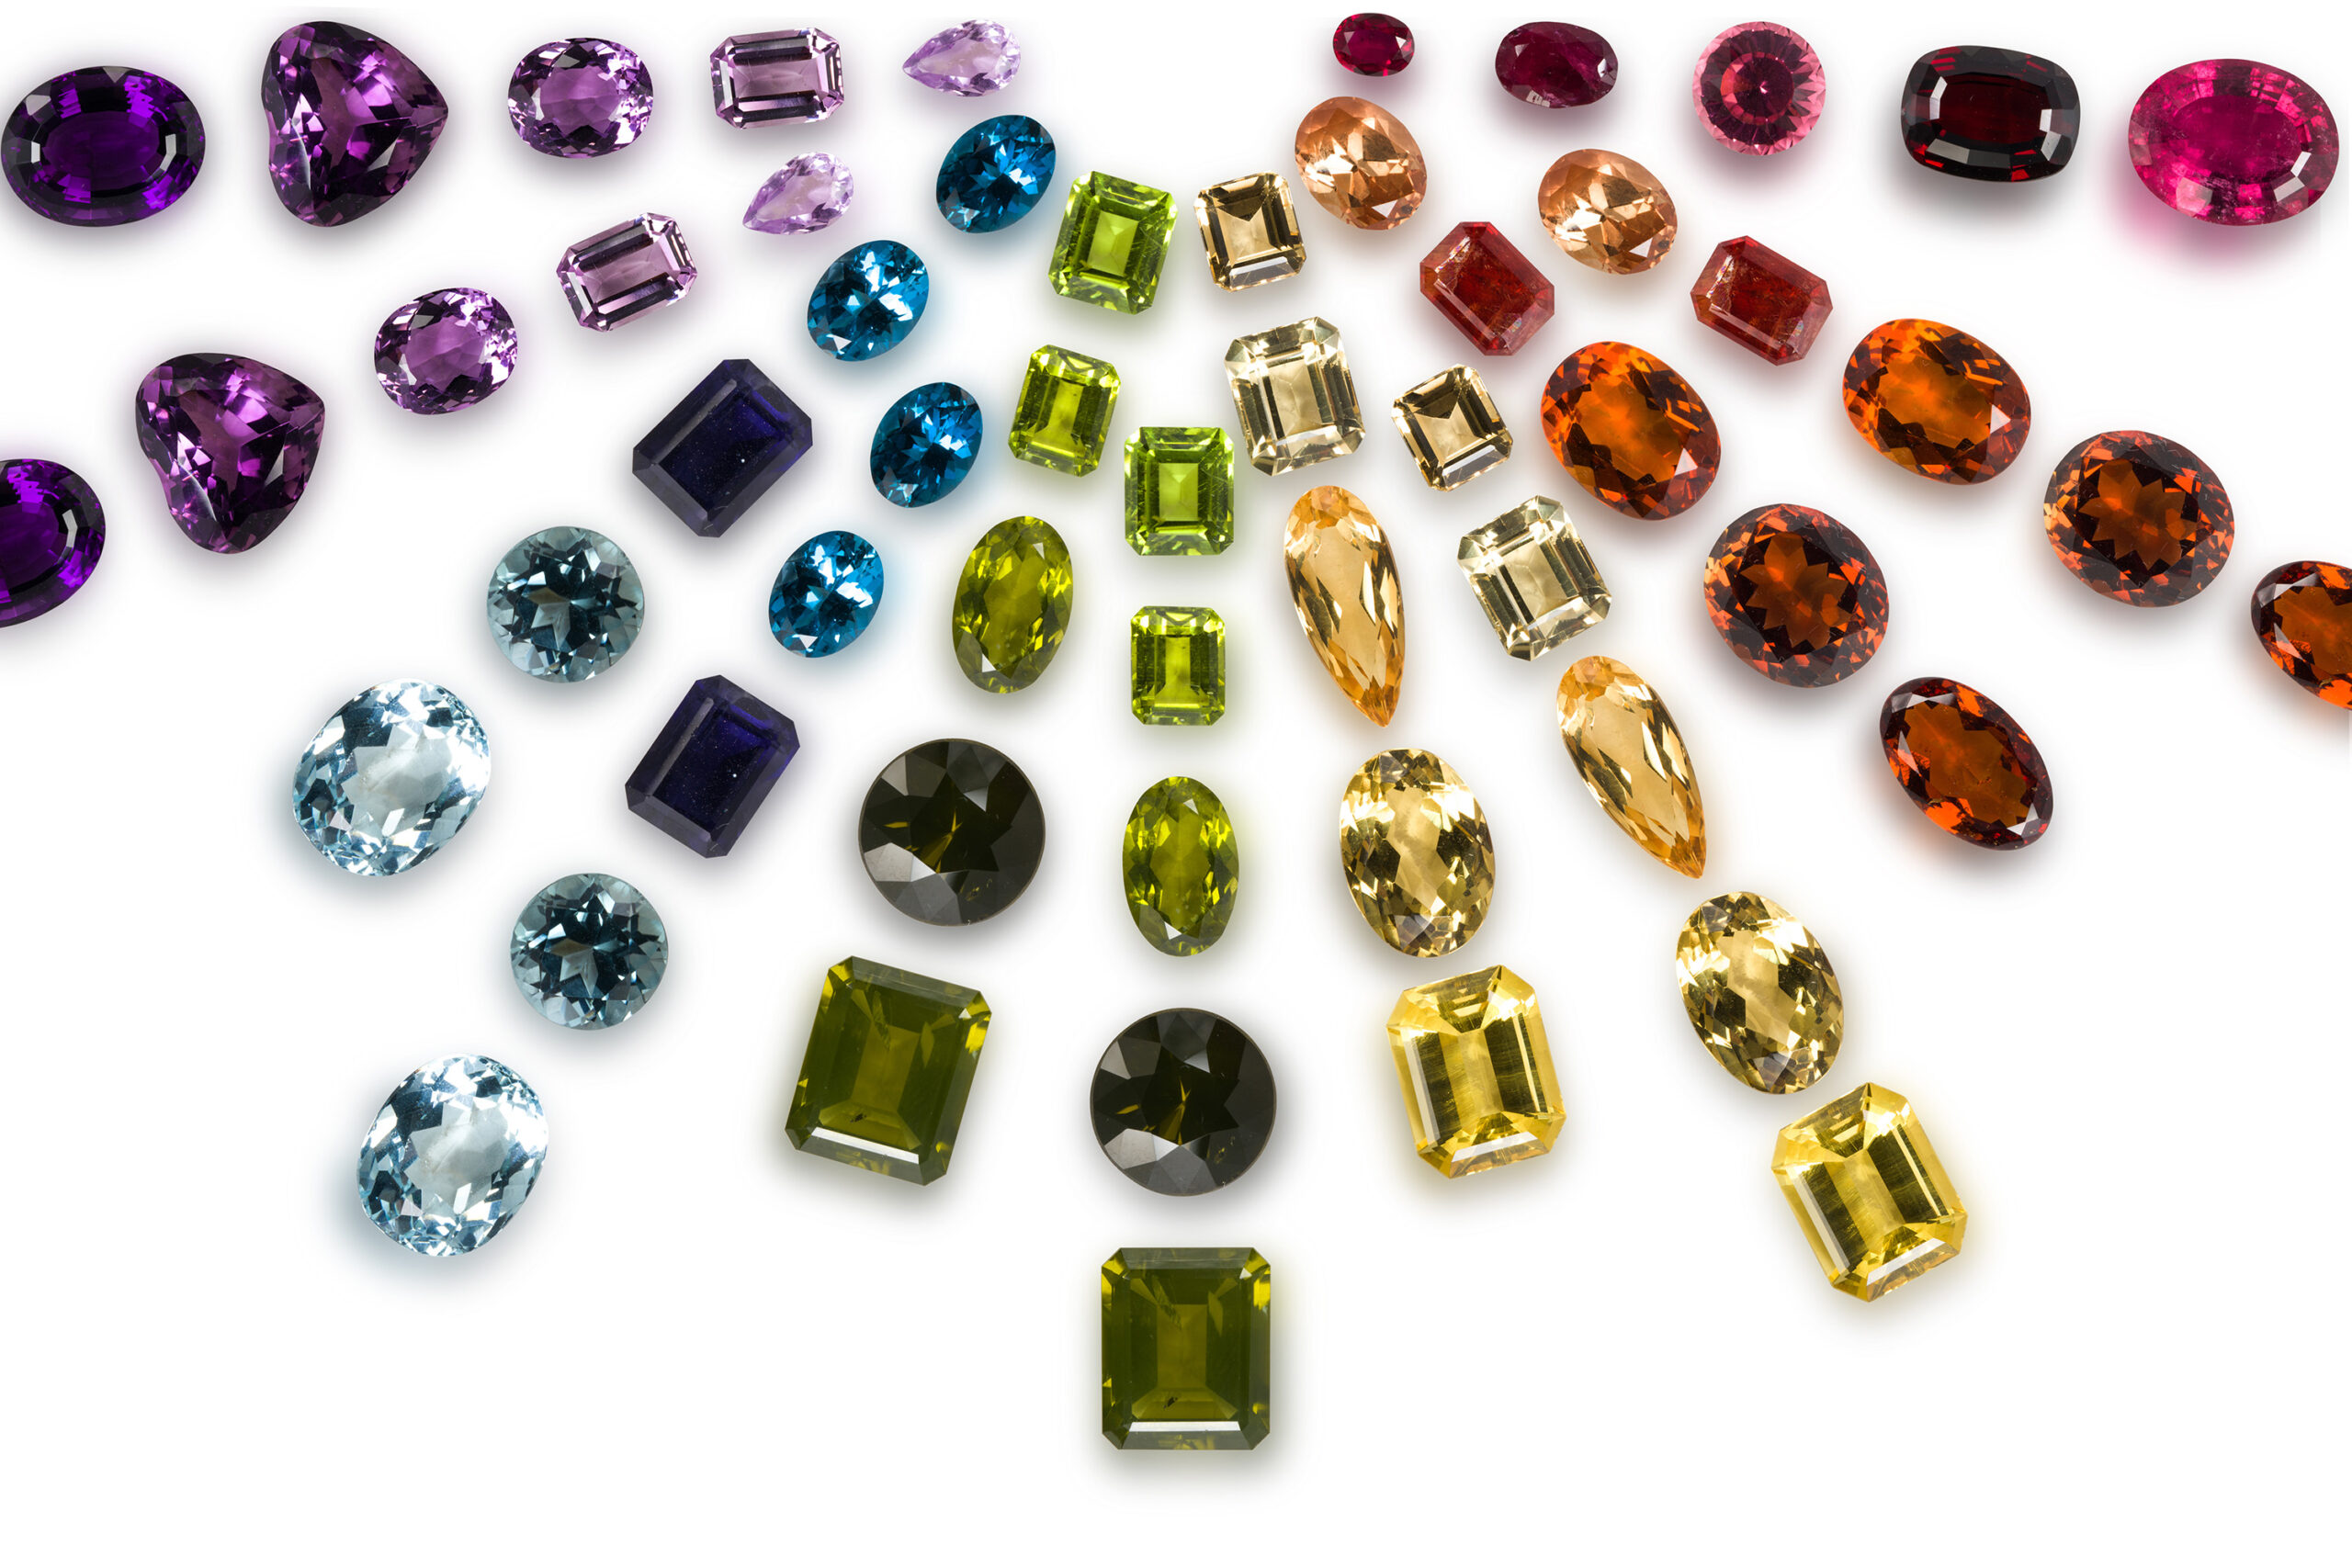 A variety of gemstones to be offered at auction on January 19th.